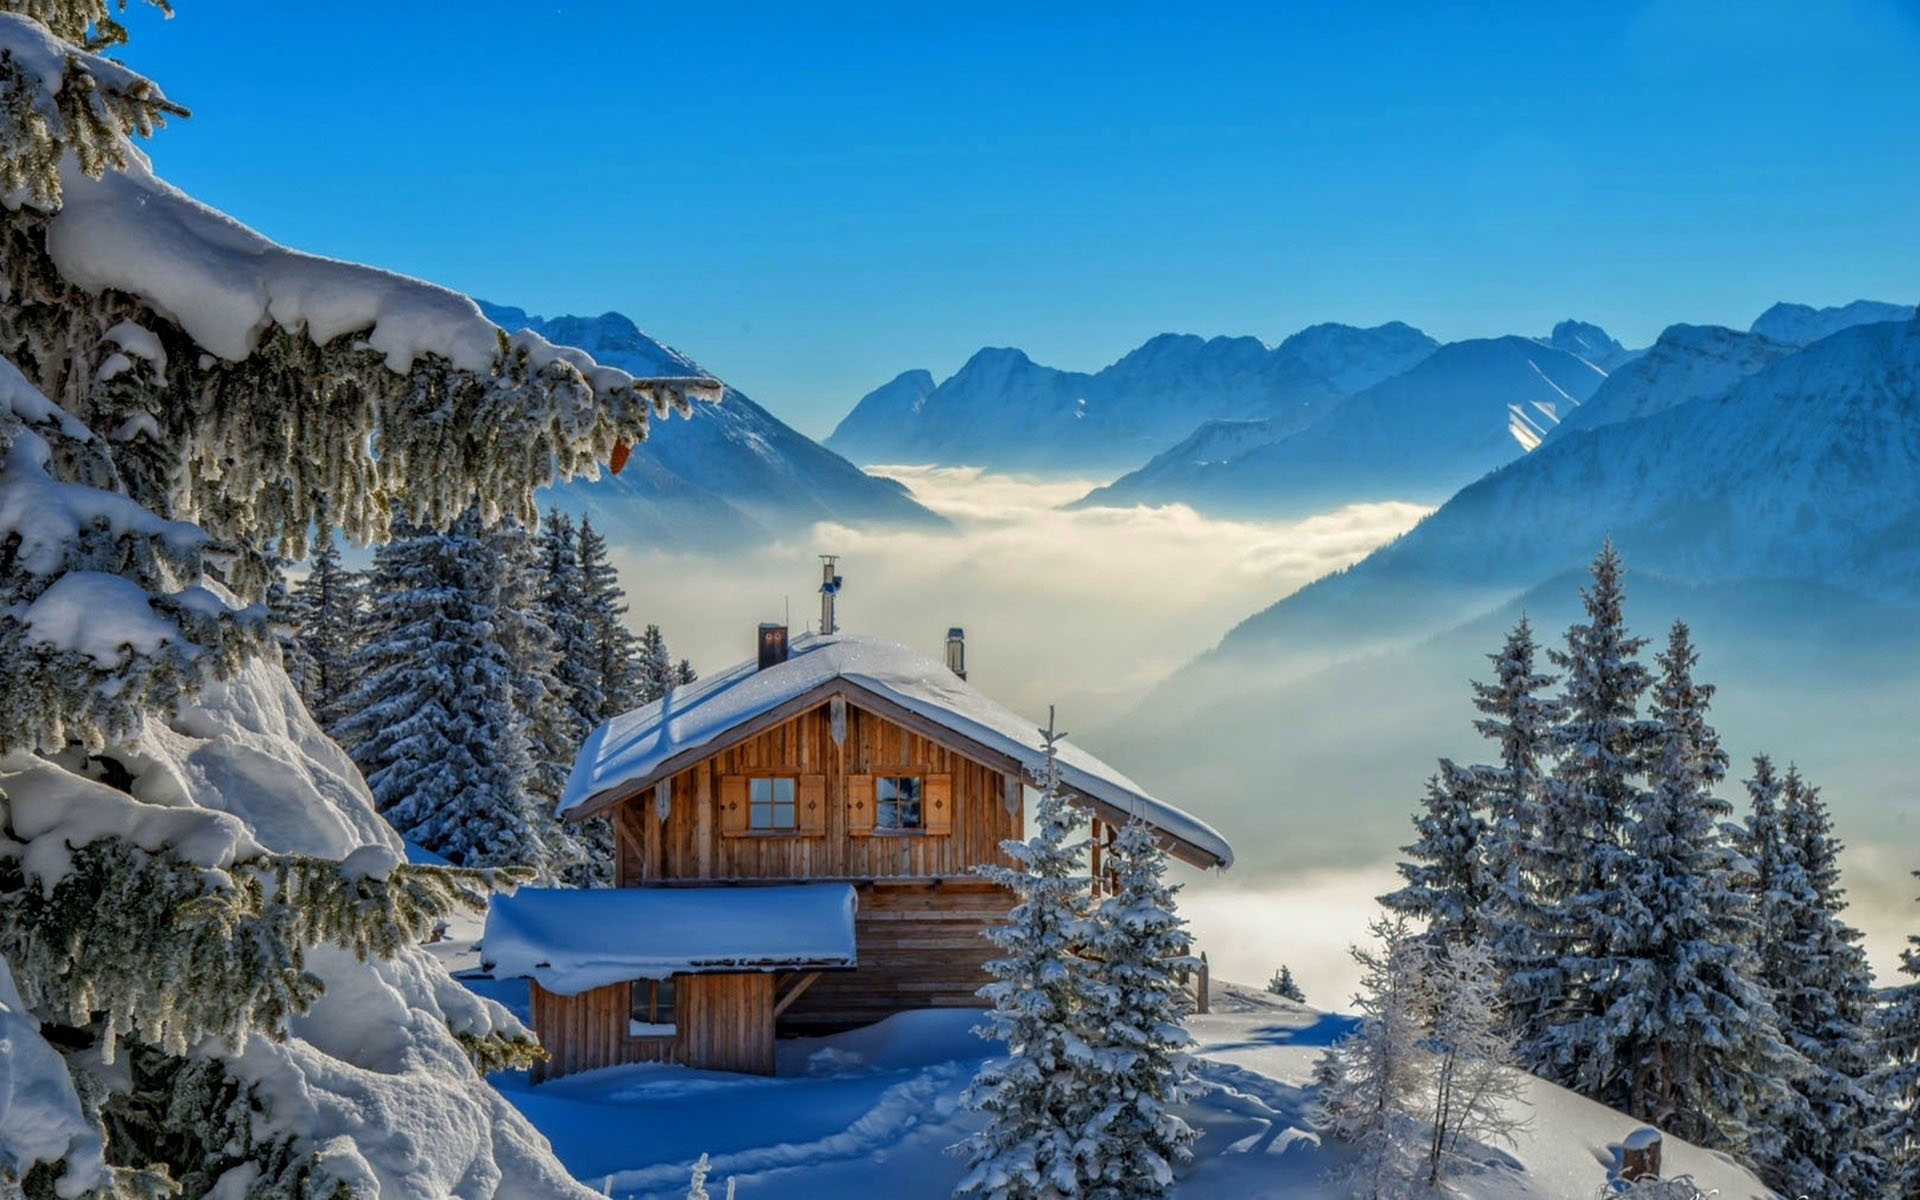 Winter Landscape Wooden House Mountain Pine Tree With White Snow Mist Mountain High Peaks Blue